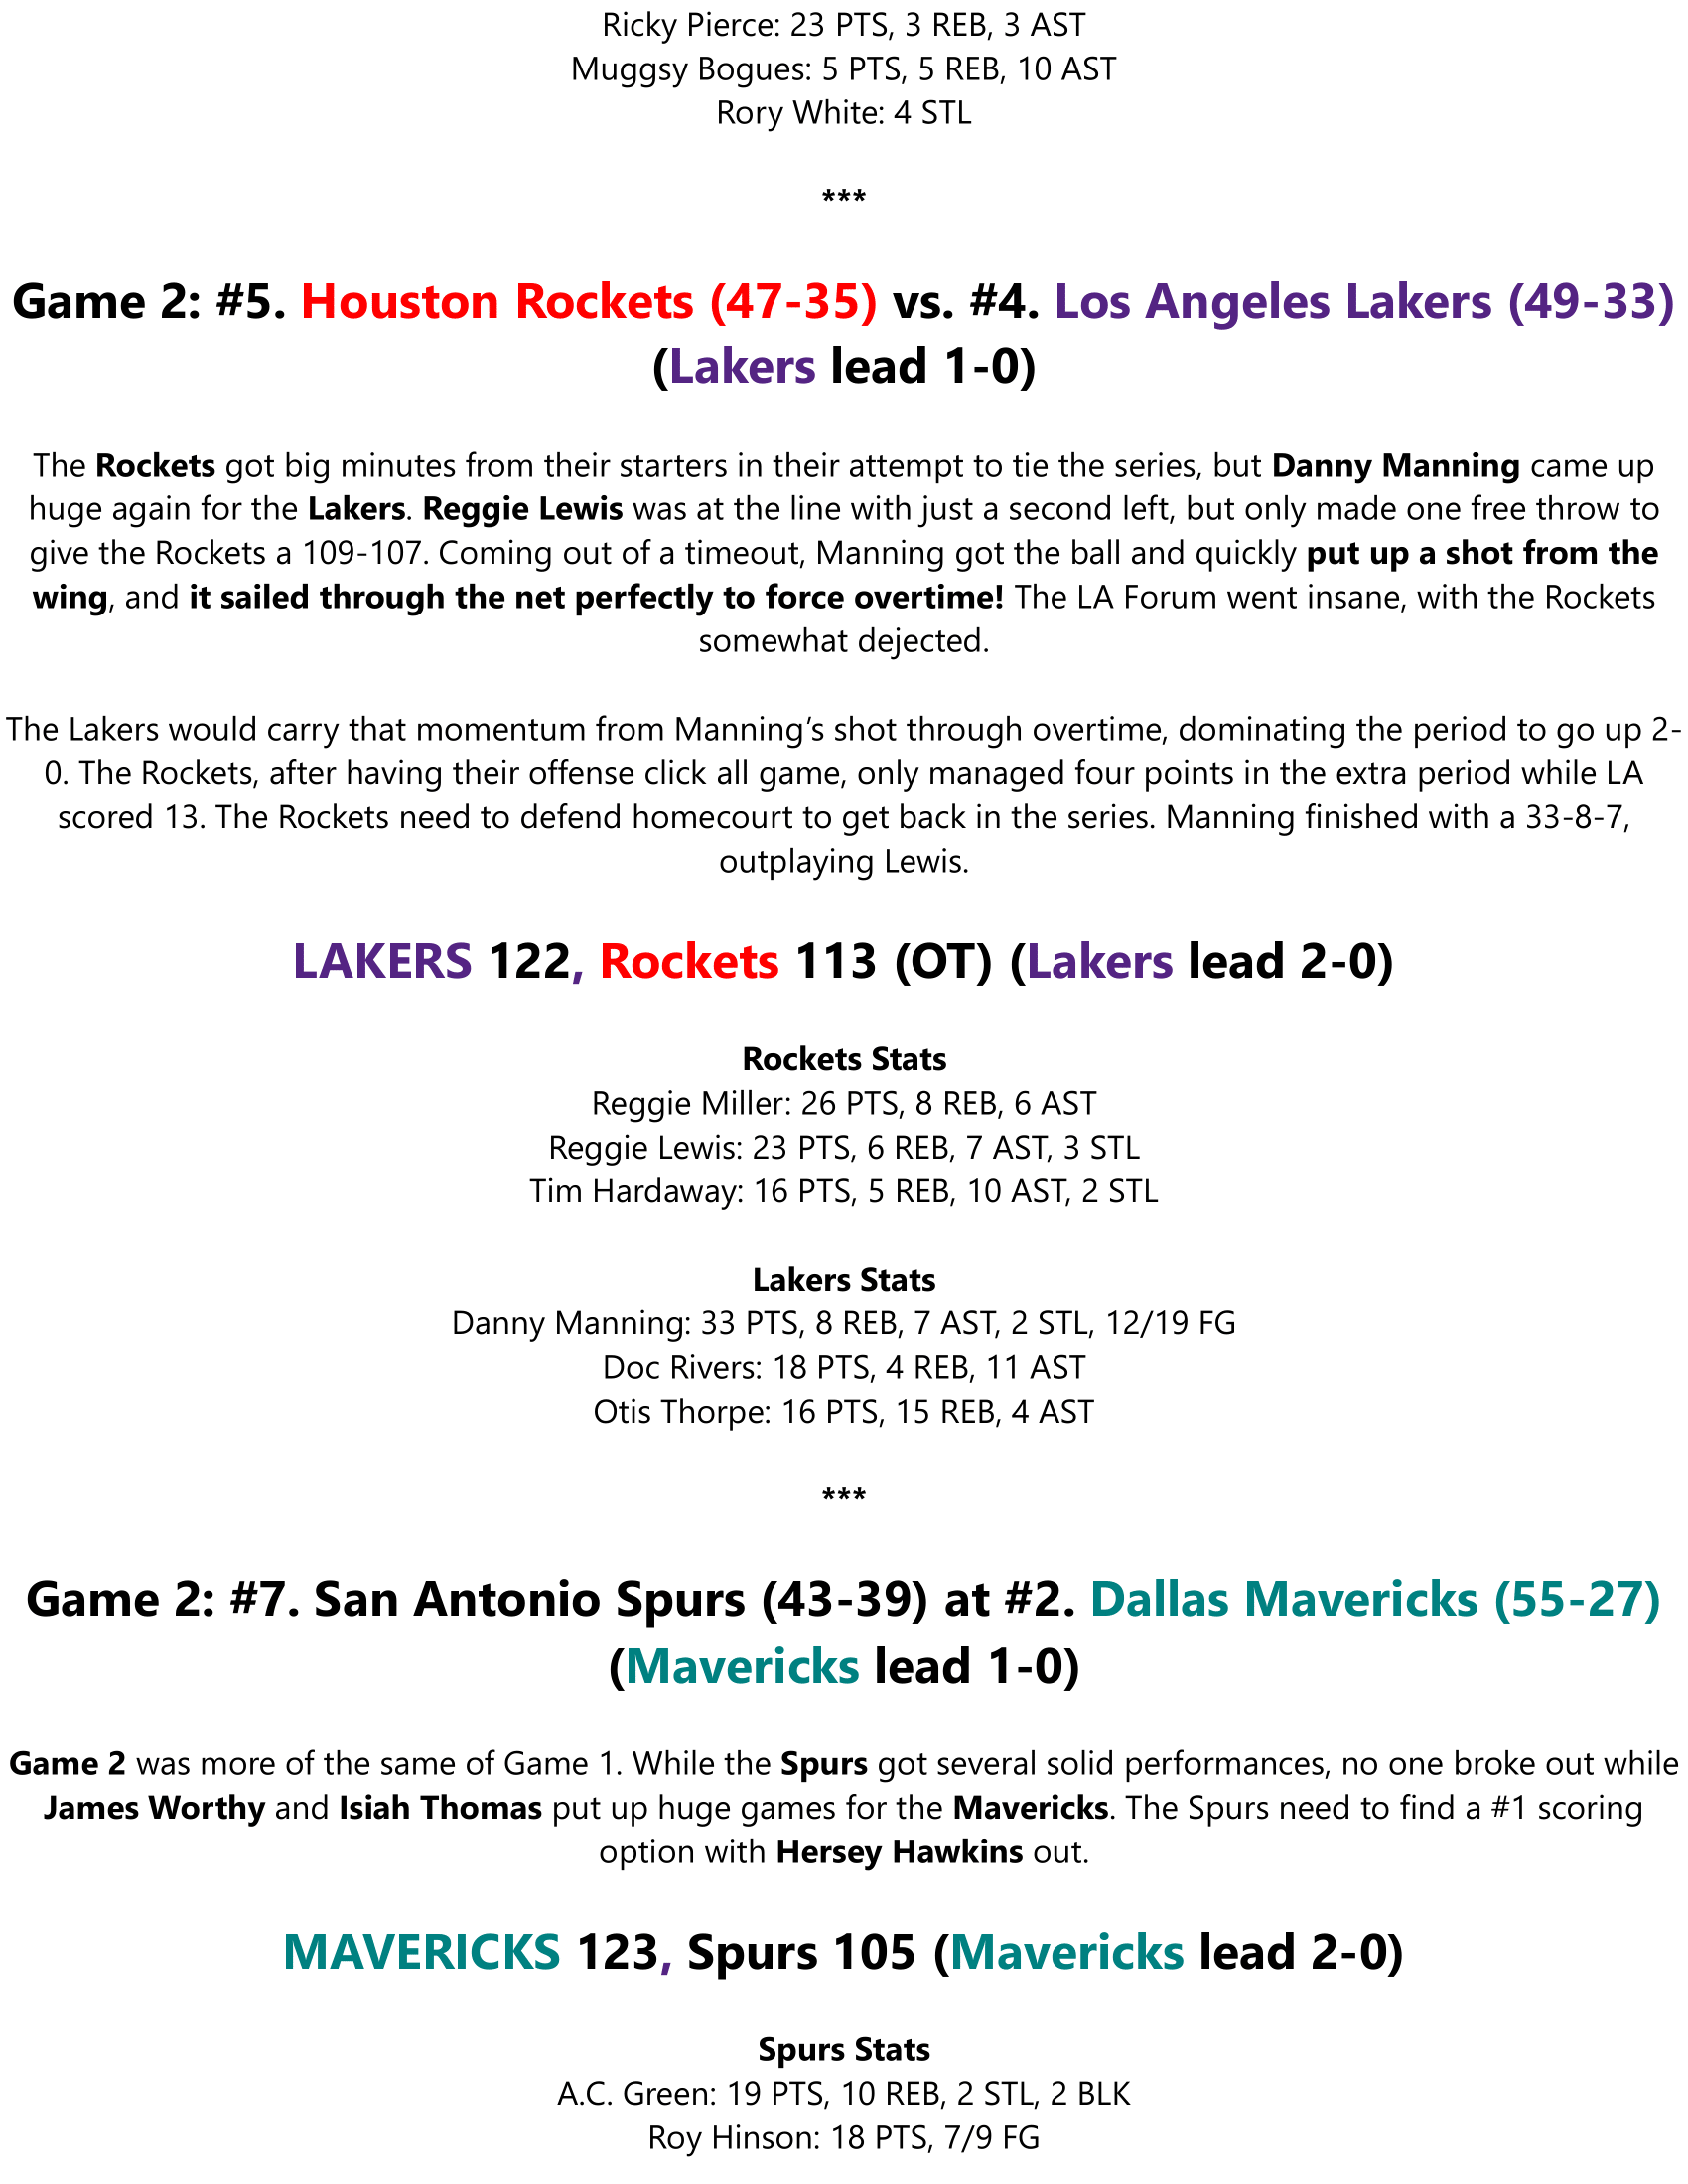 89-90-Part-5-Round-1-Semi-Preview-06.png